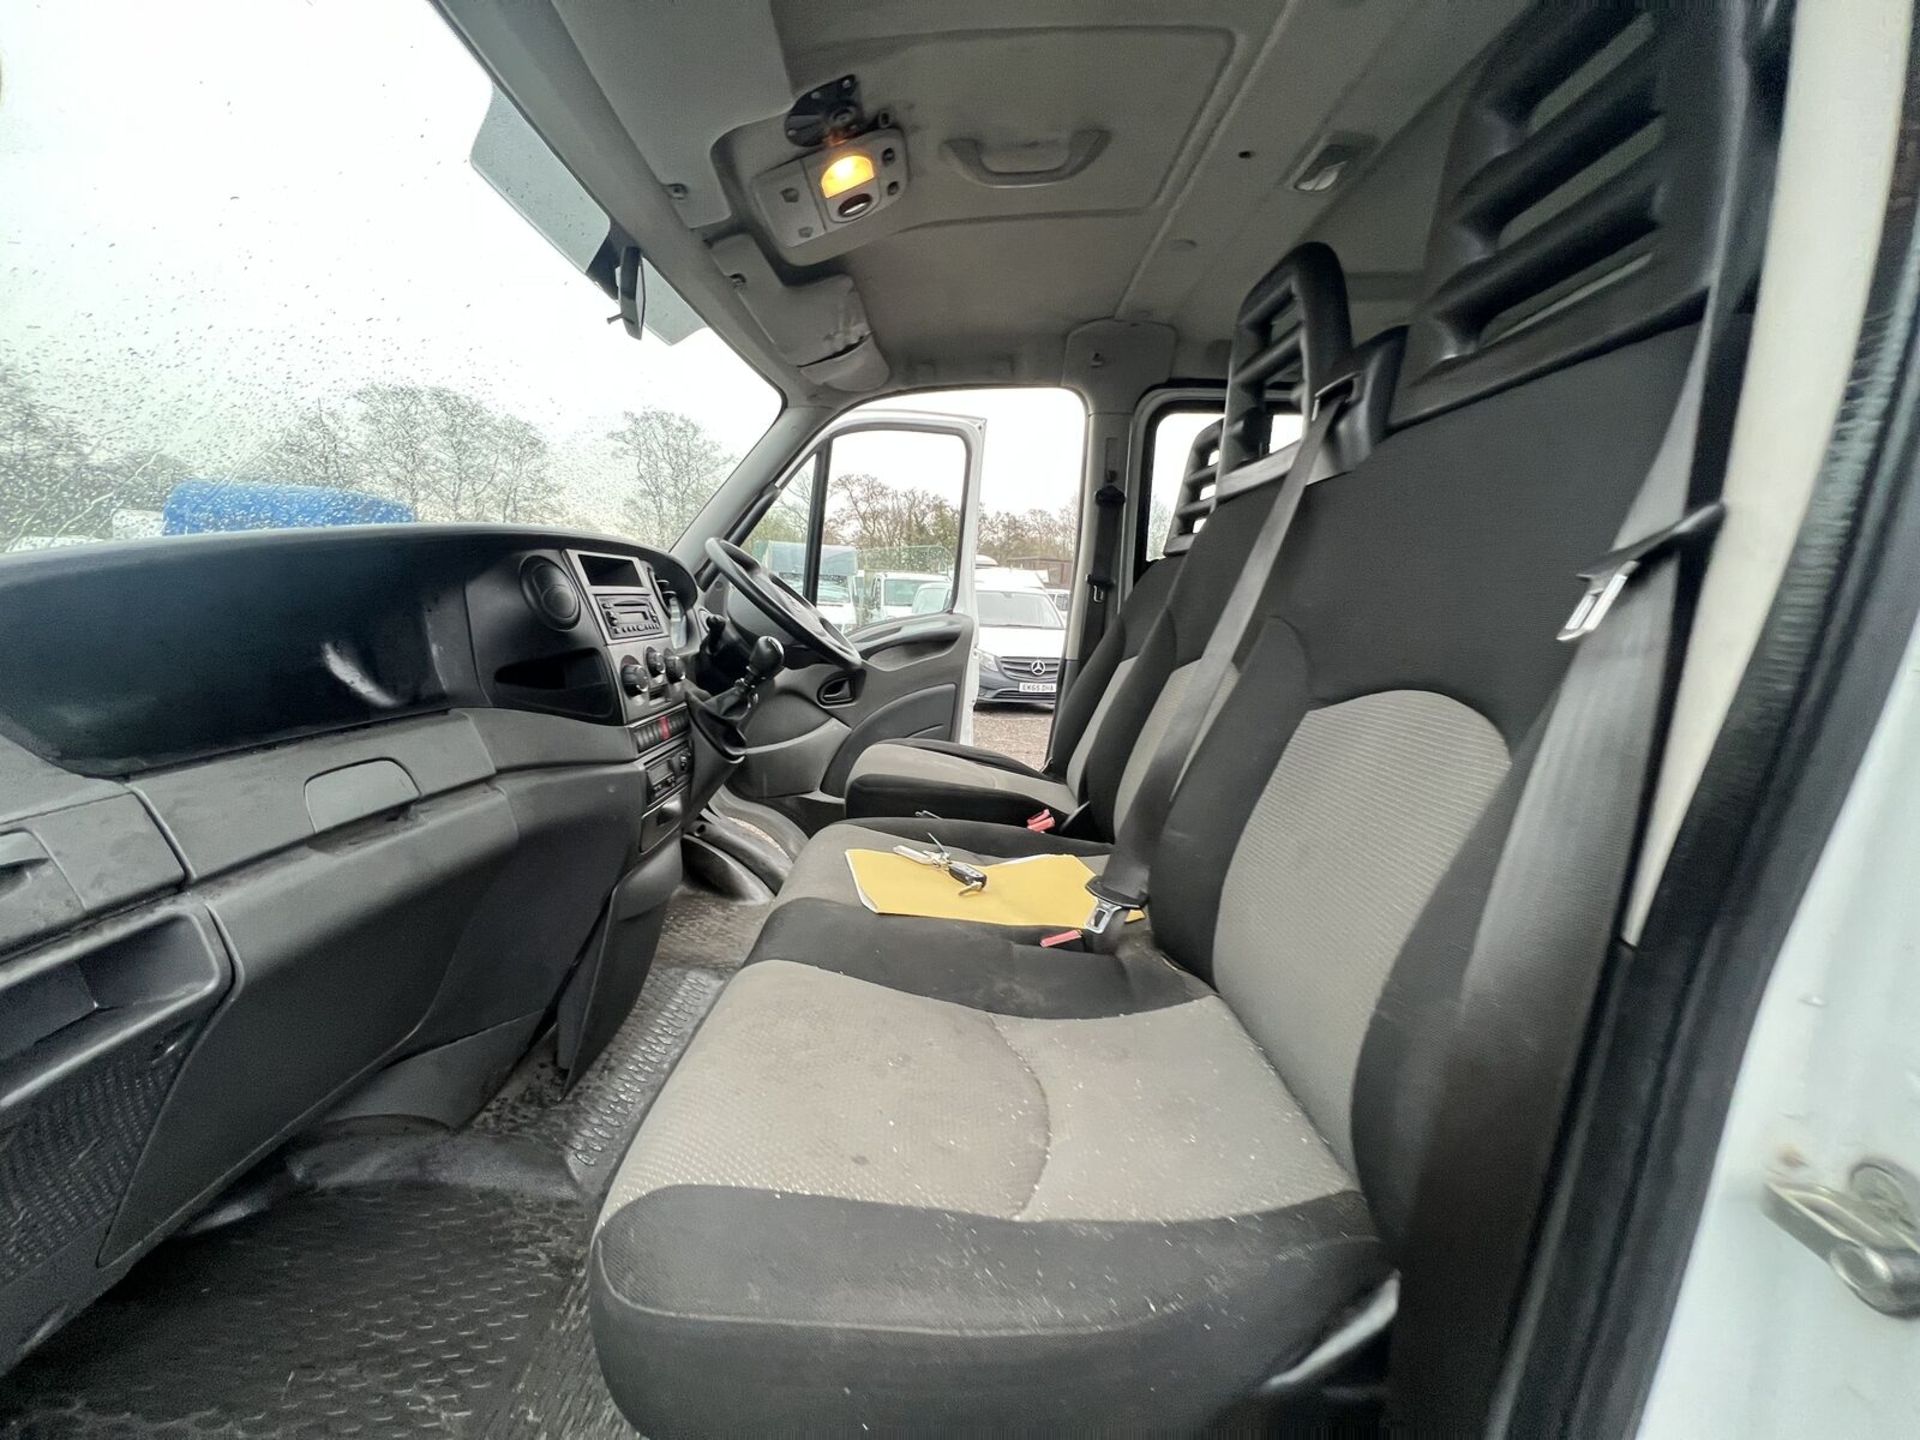 PRECISION IN MOTION: 2012 IVECO DAILY 70C17 - WHERE PERFORMANCE MEETS CARGO EXCELLENCE - Image 4 of 15